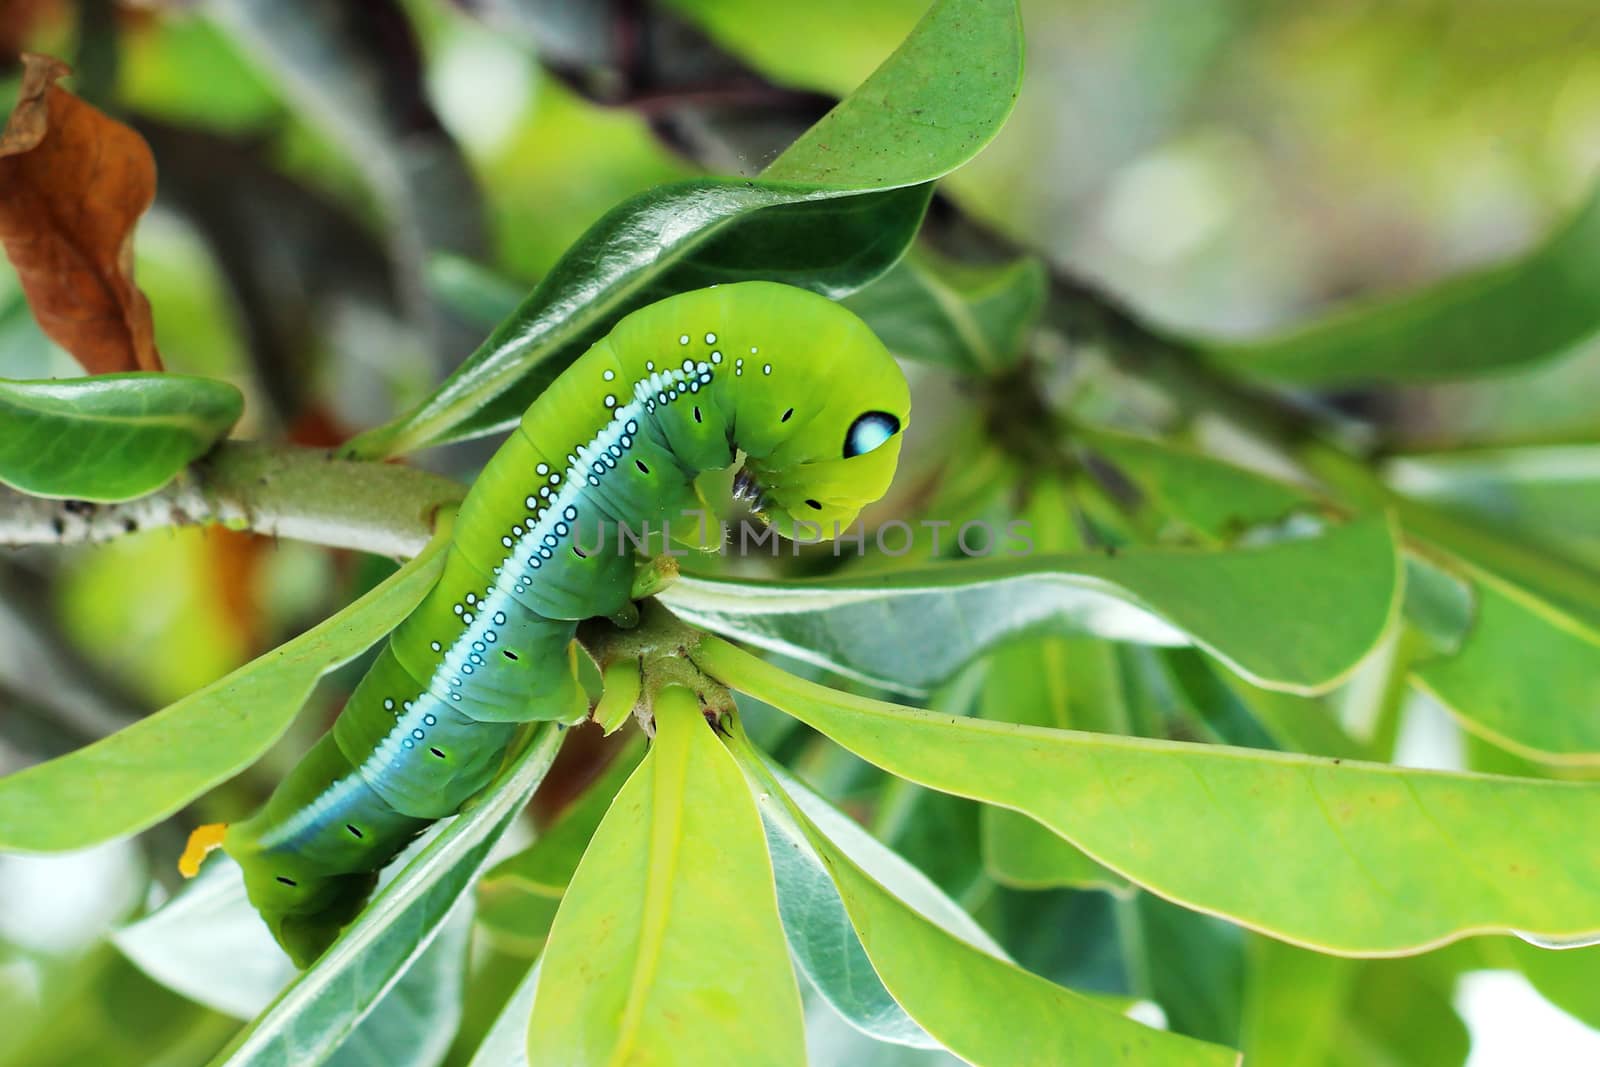 Image of green caterpillar on green leaf by yod67